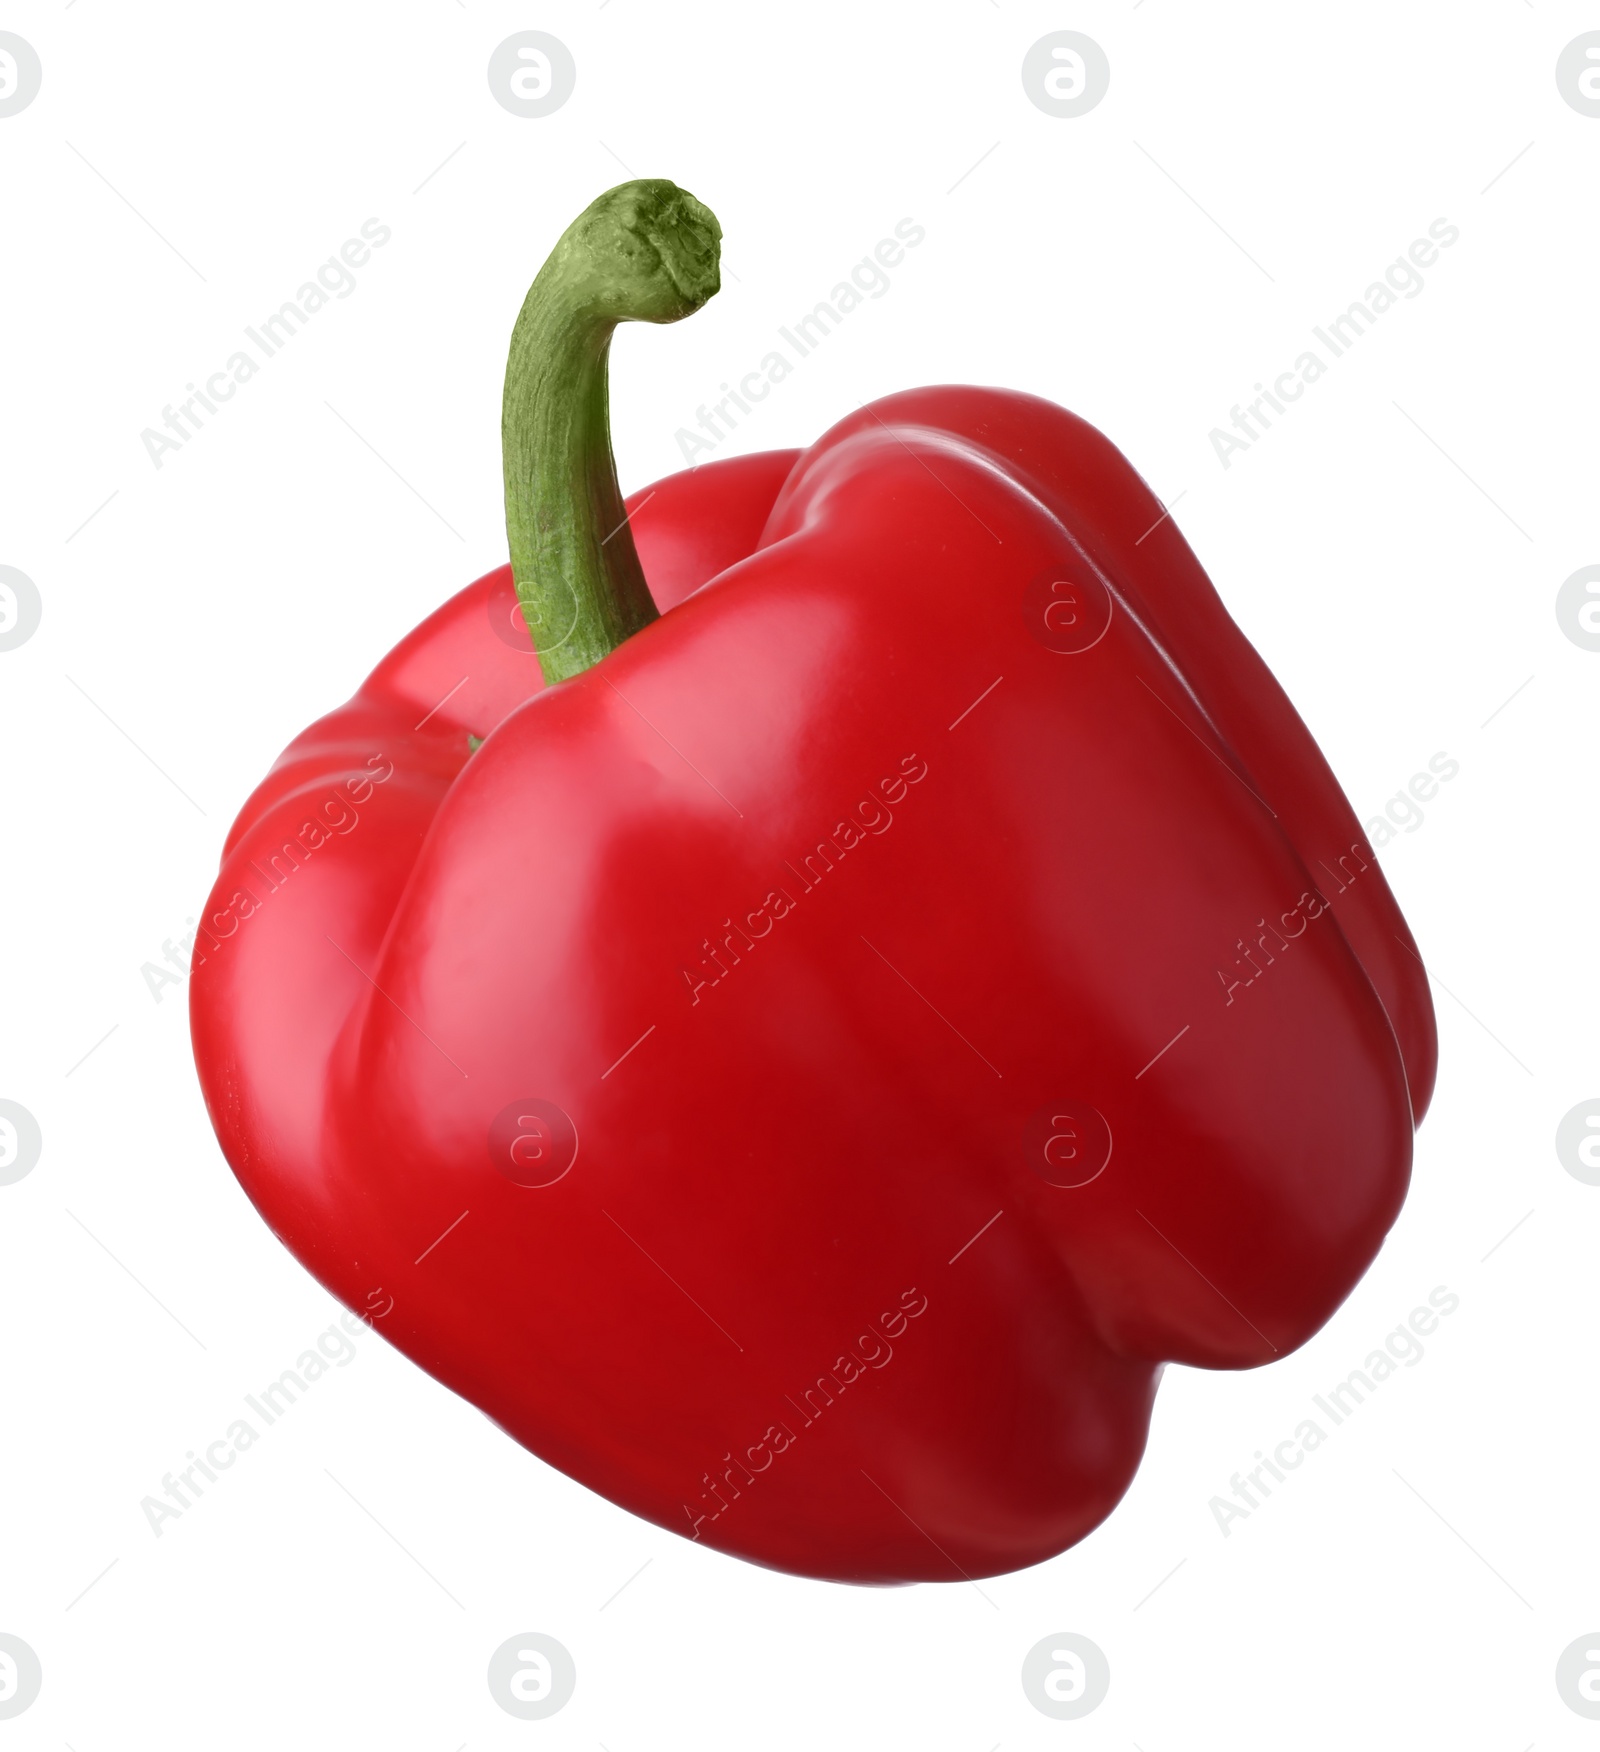 Photo of Raw red bell pepper isolated on white